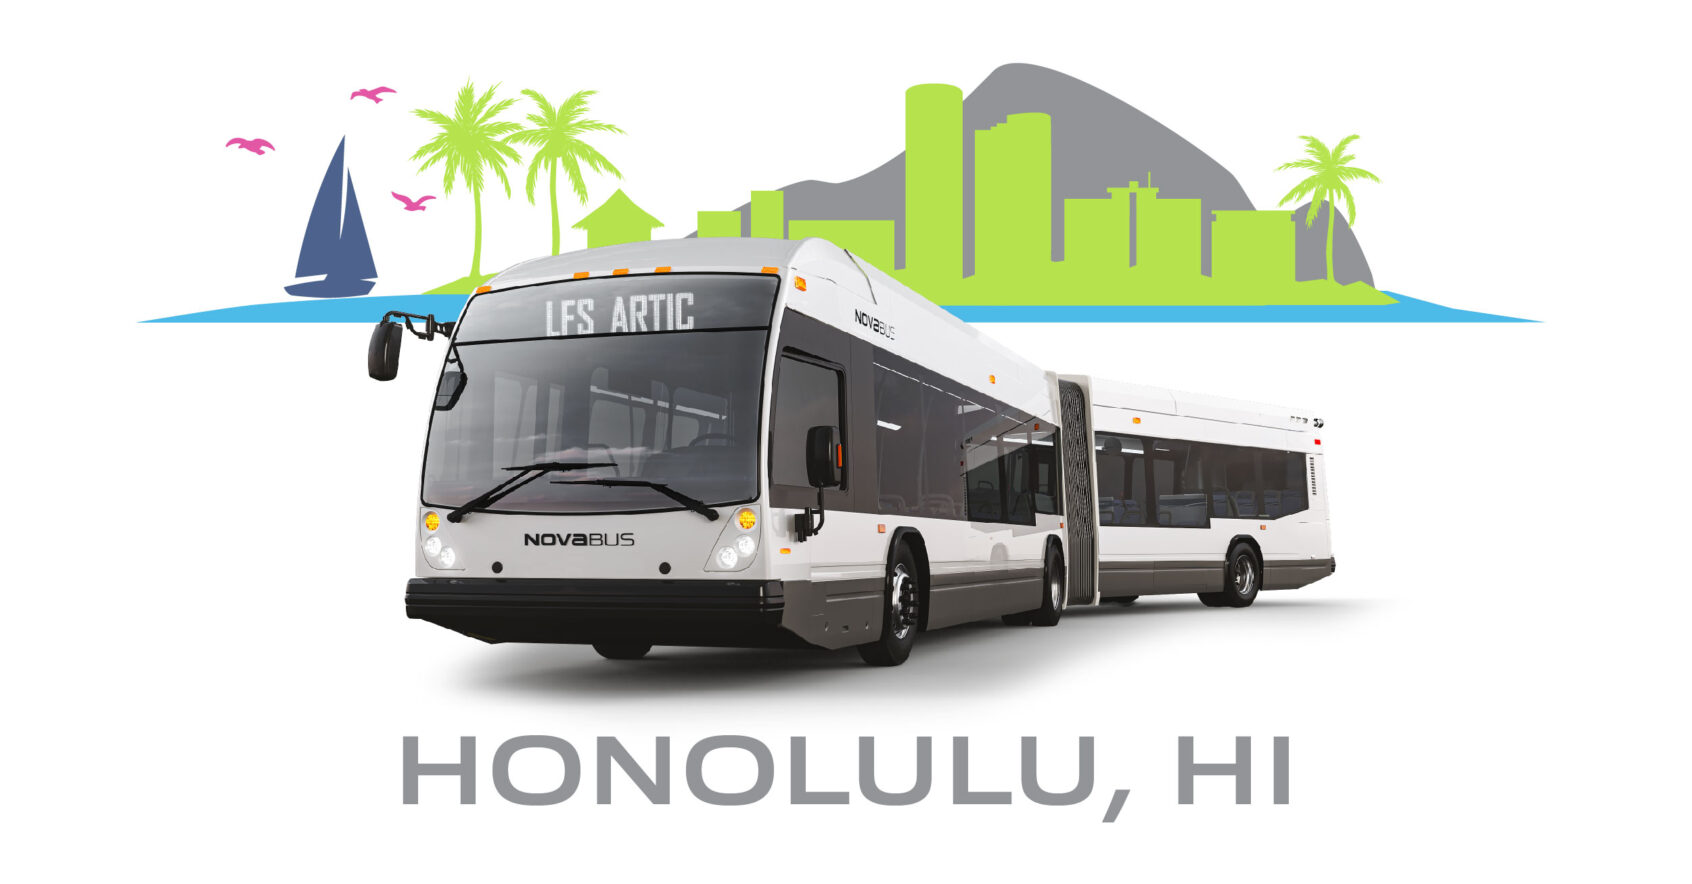 Nova Bus to supply up to 35 articulated buses to the City and County of Honolulu